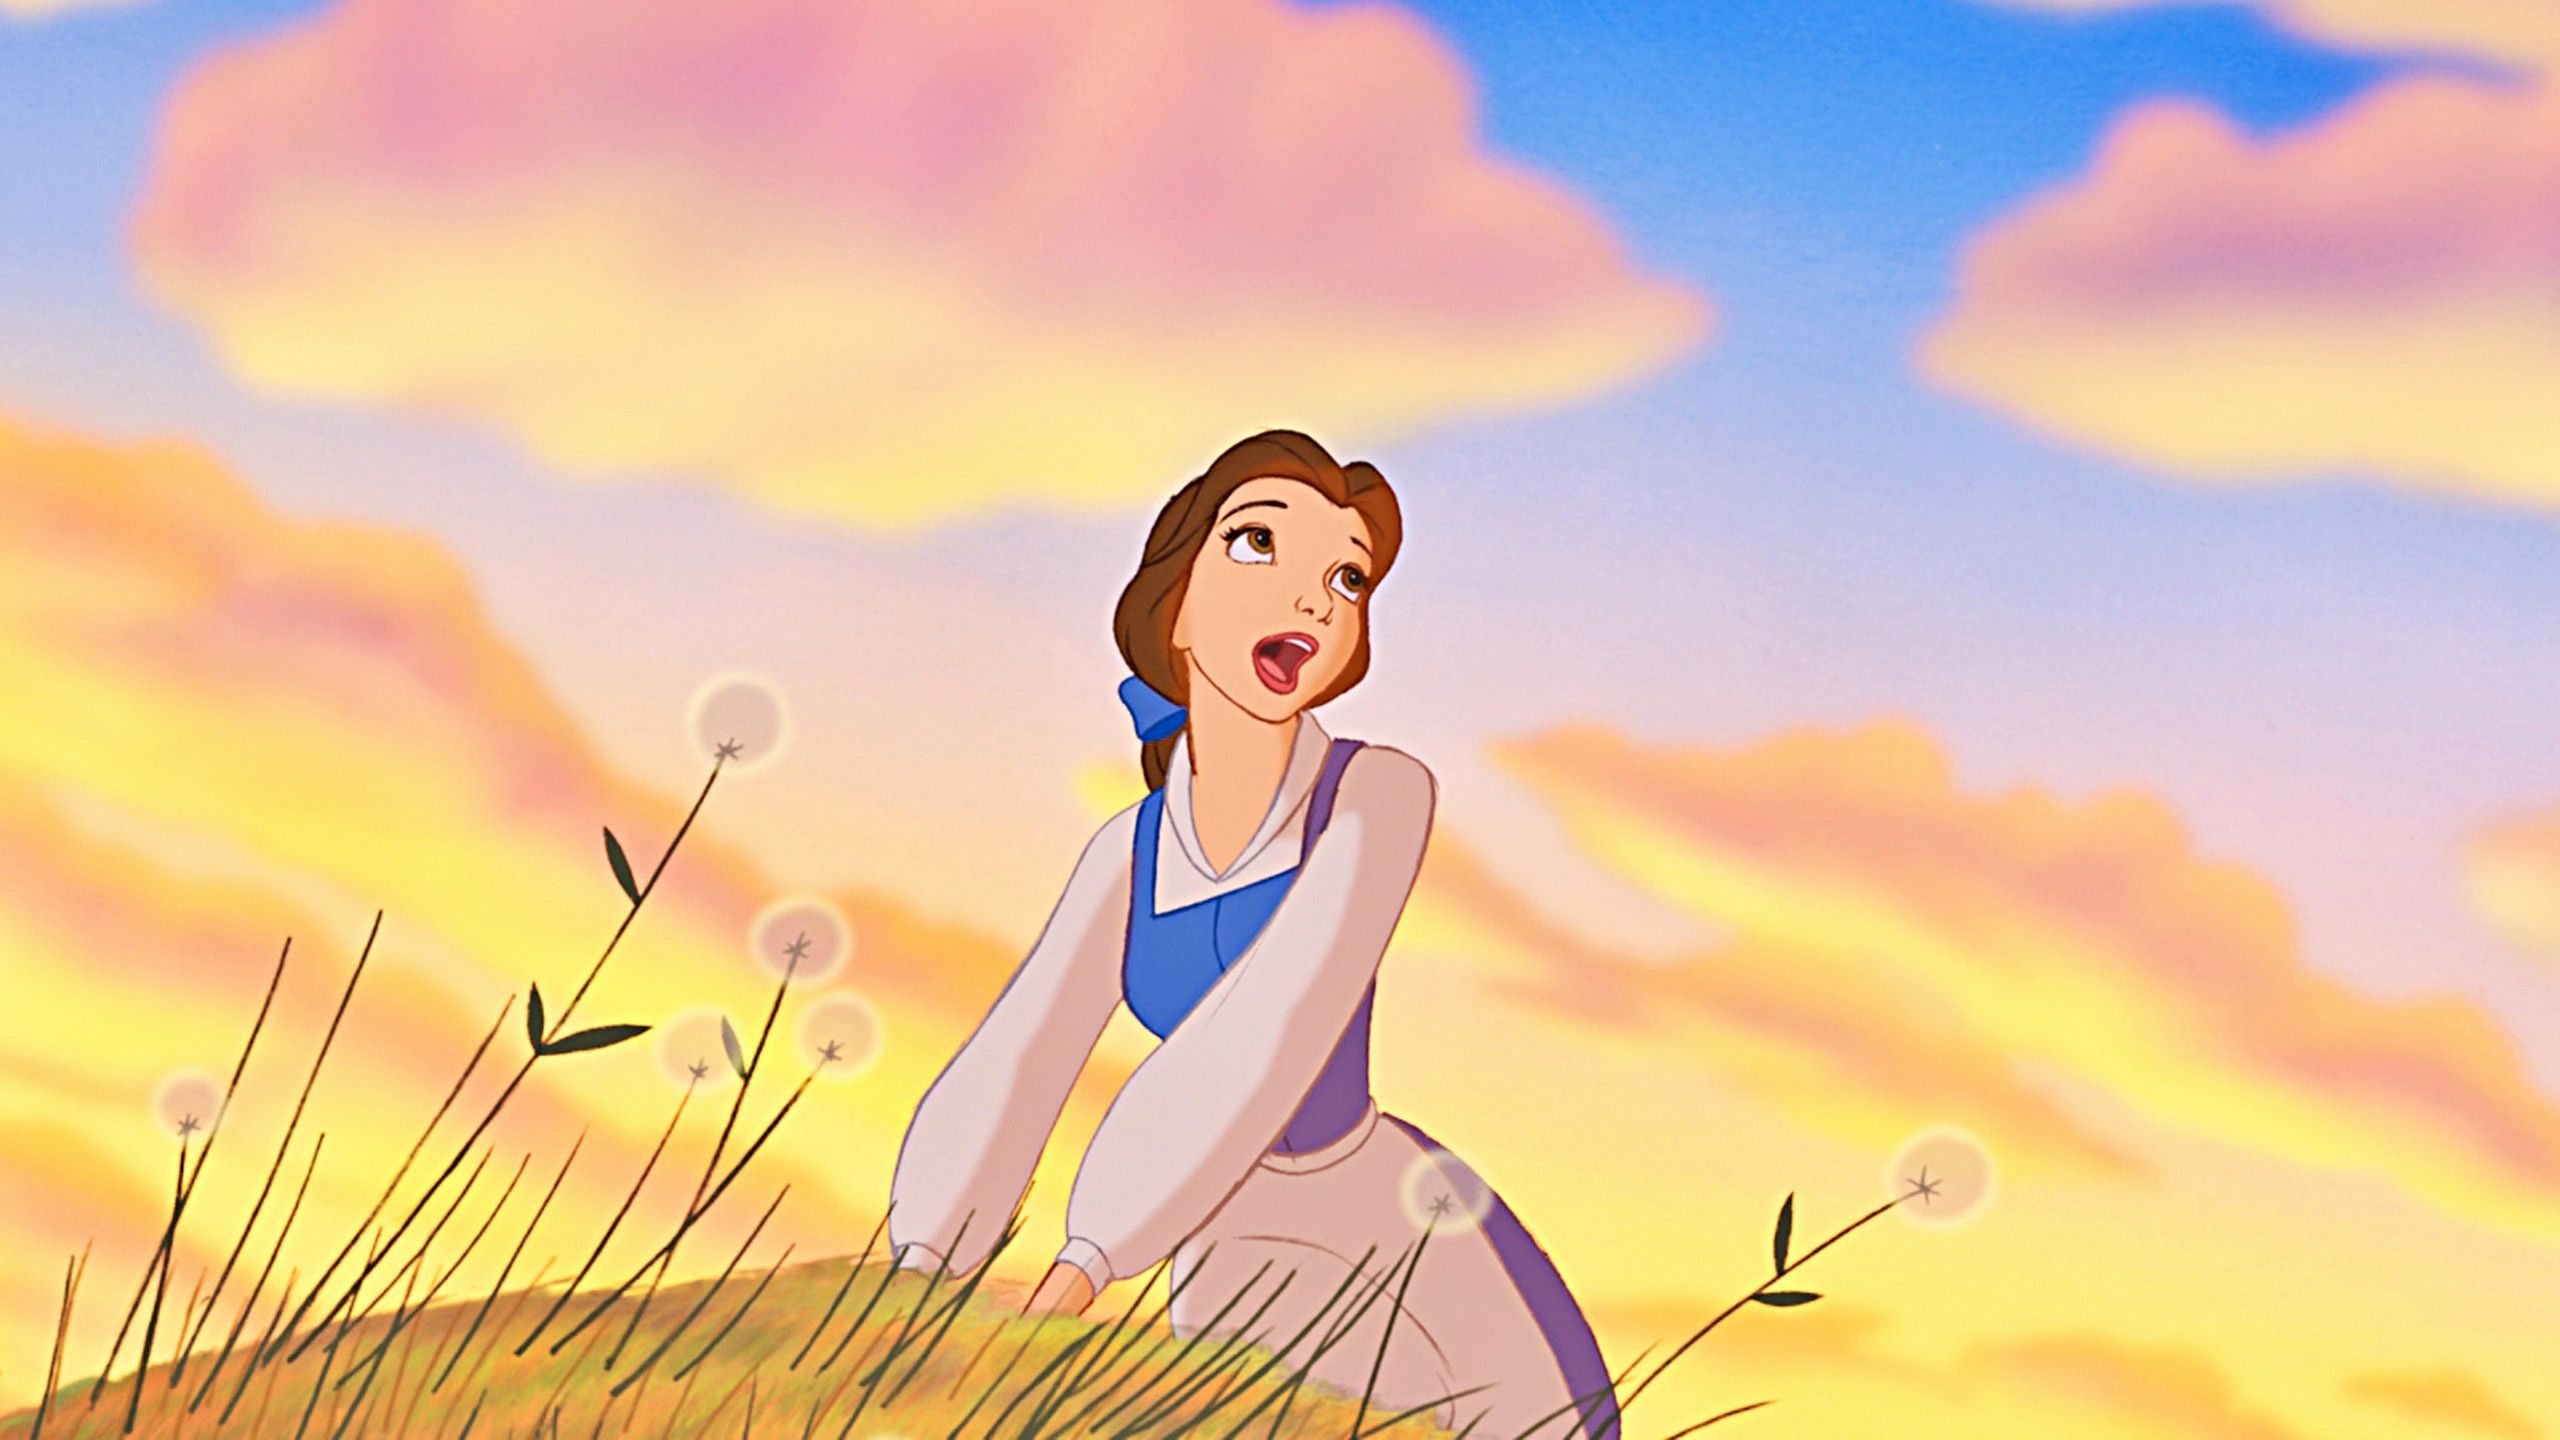 Princess Belle Pictures Wallpapers